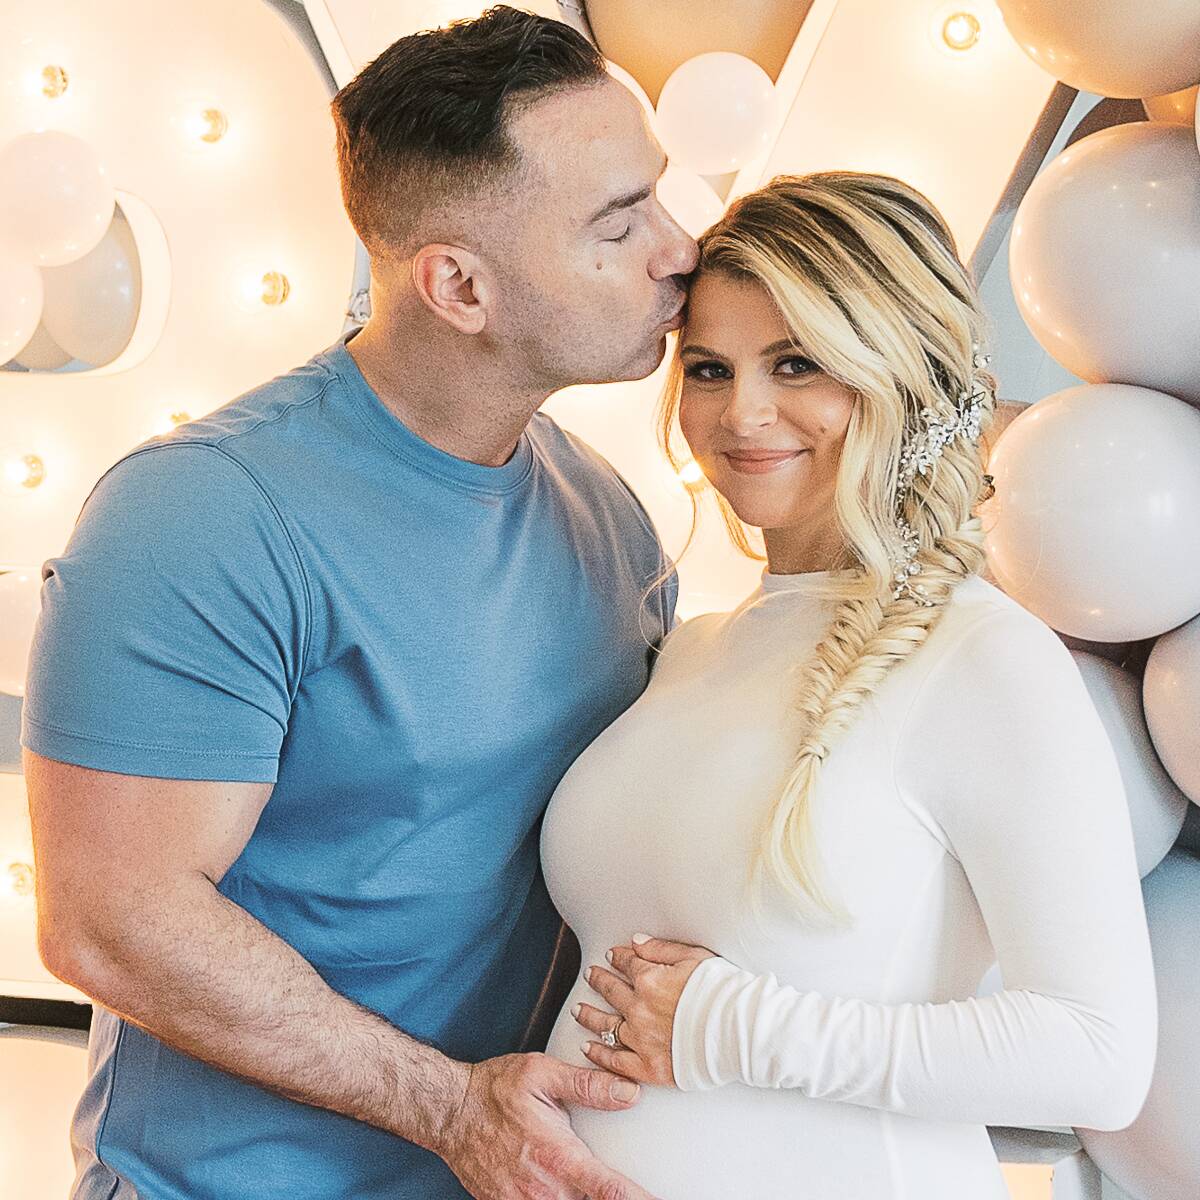 Go Inside Mike "The Situation" Sorrentino and Wife Lauren's "Dream" Baby Shower